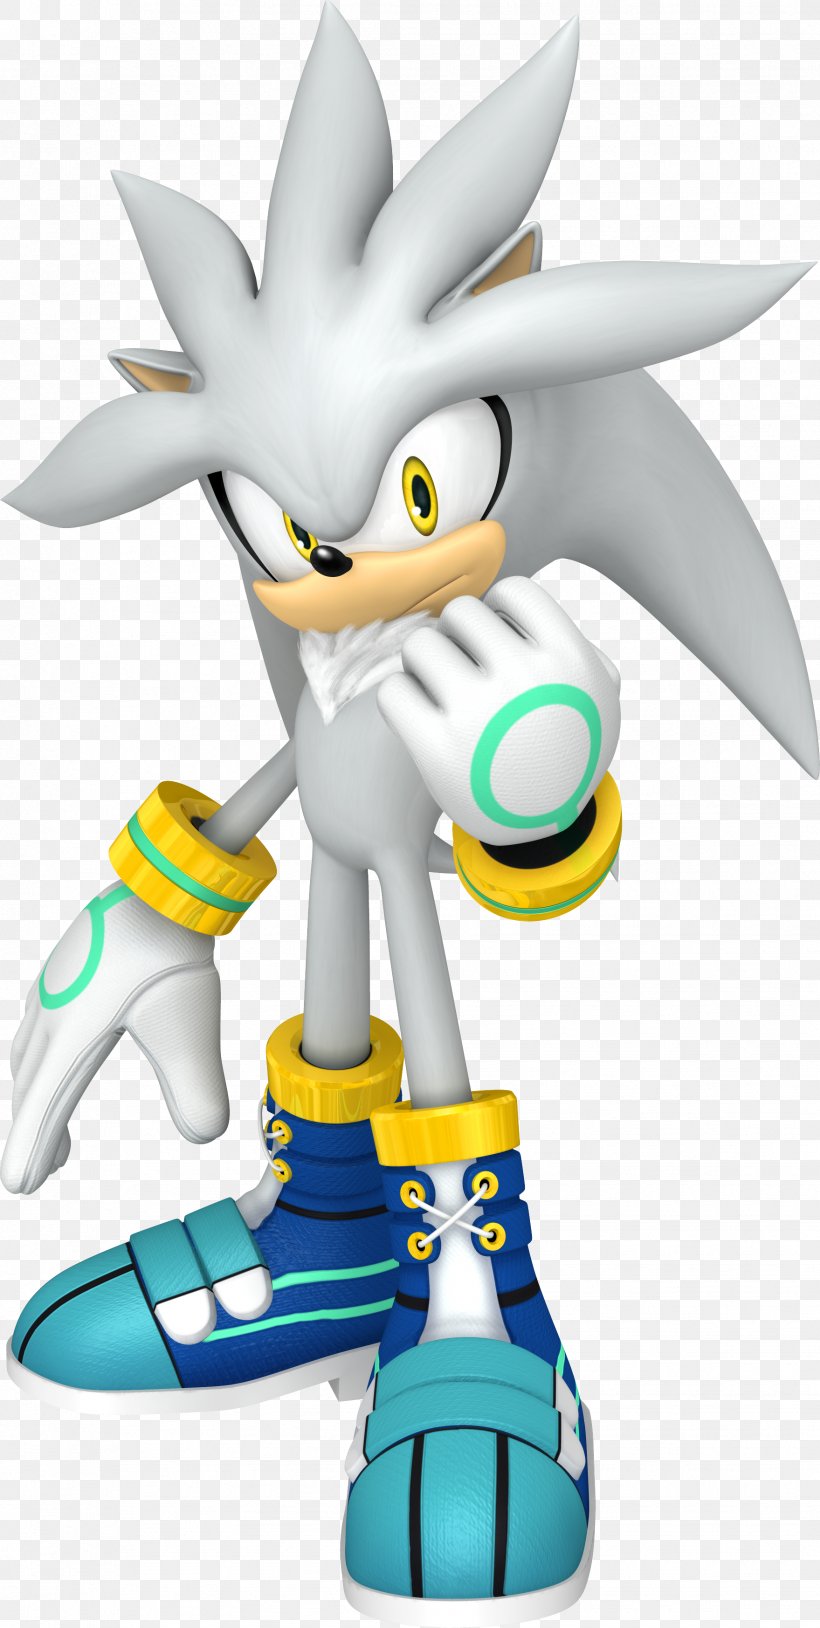 Sonic Free Riders Sonic The Hedgehog Sonic Riders Mario & Sonic At The Olympic Games Shadow The Hedgehog, PNG, 1759x3493px, Sonic Free Riders, Action Figure, Amy Rose, Cartoon, Doctor Eggman Download Free